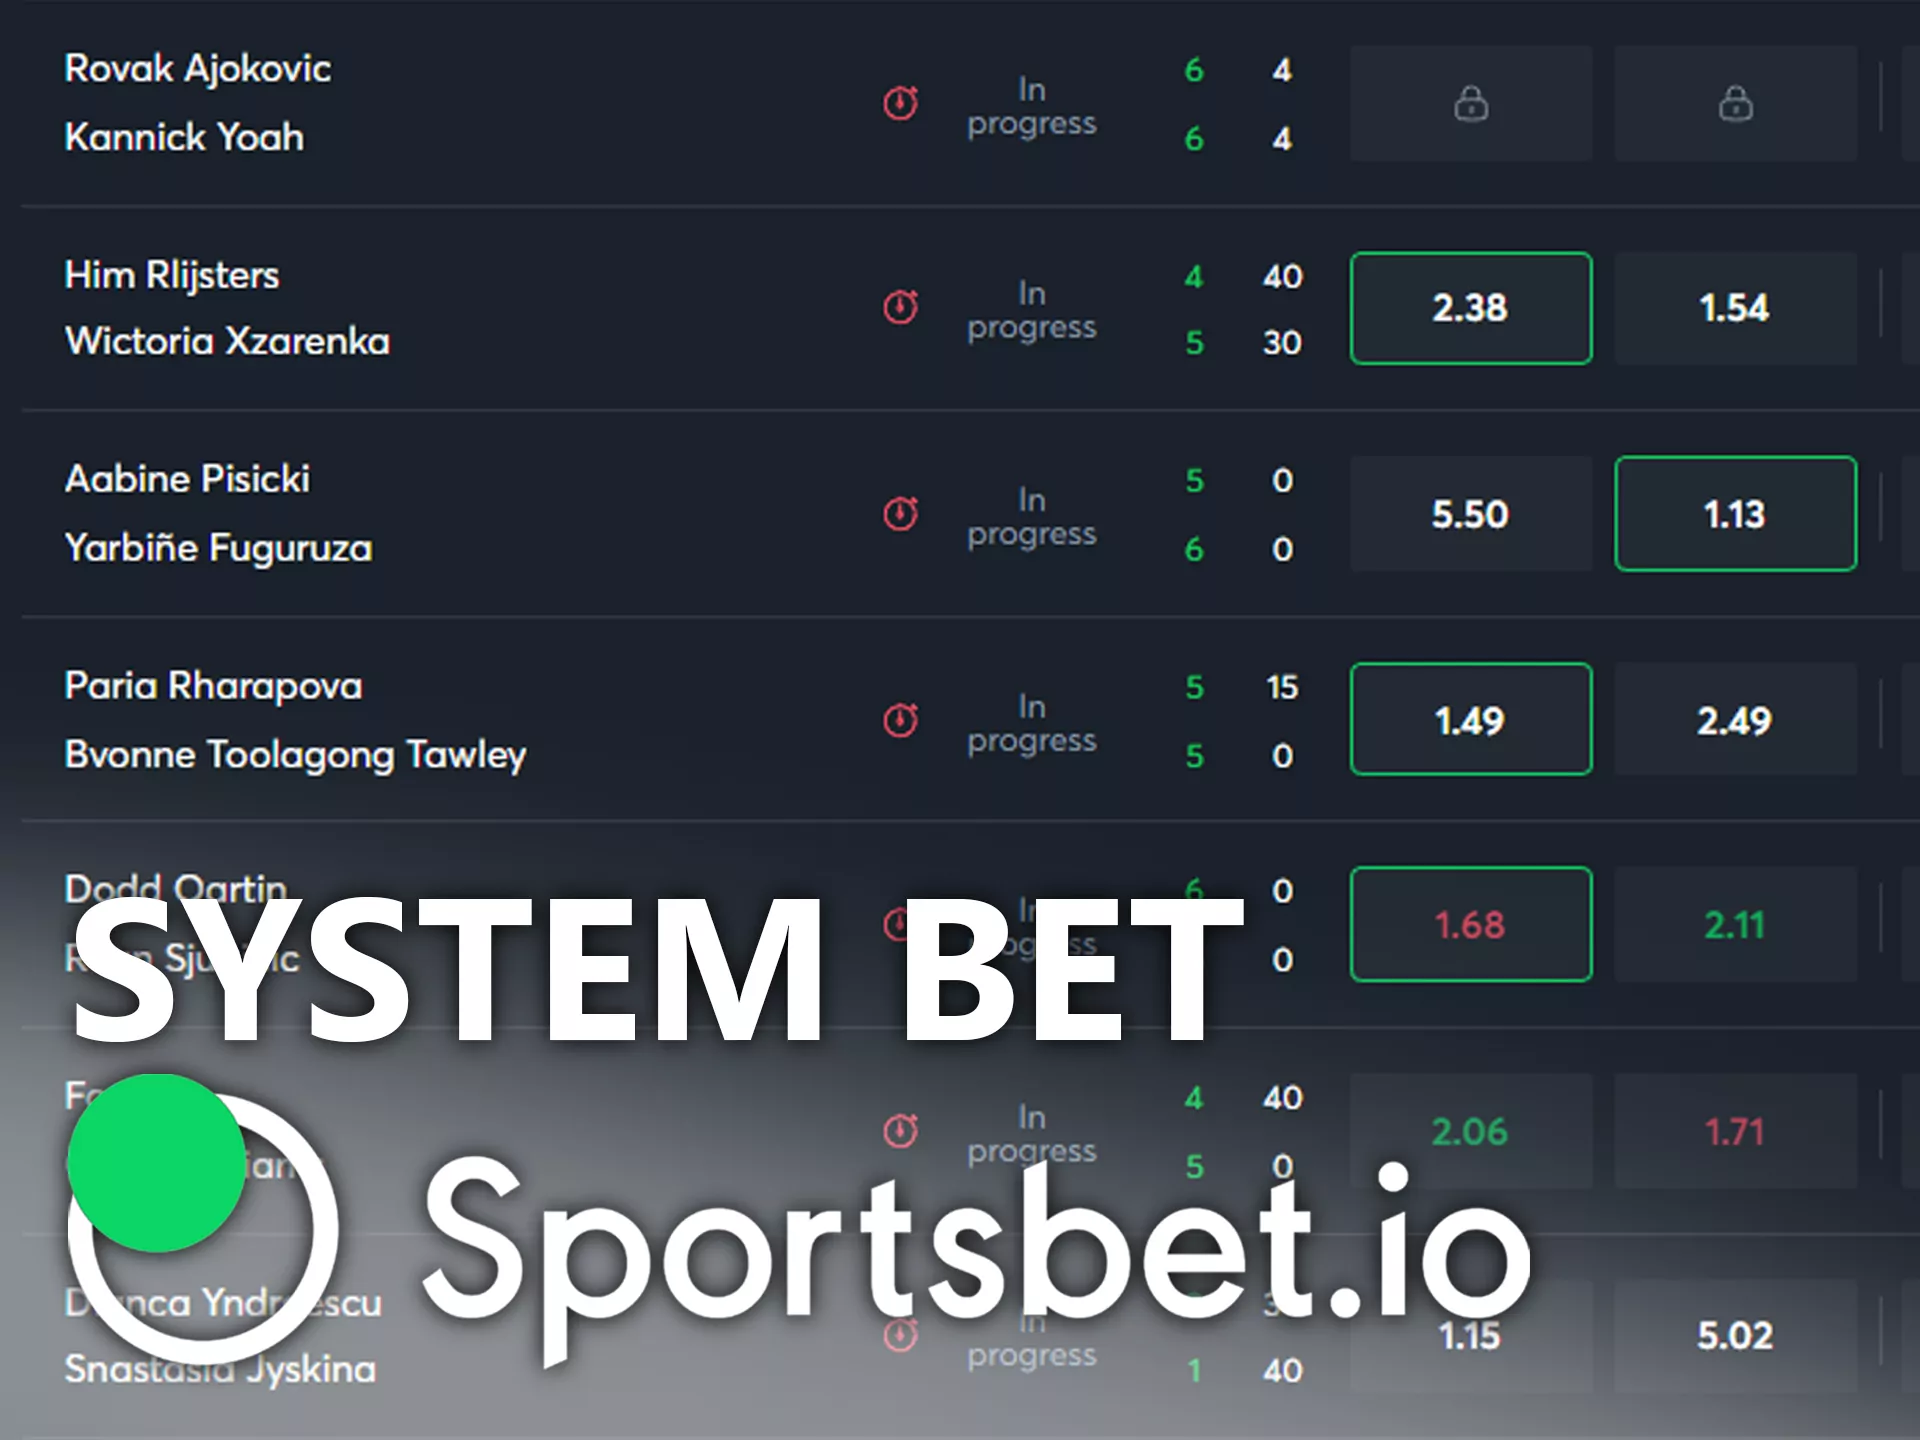 System bet are the most popular at Sportsbet.